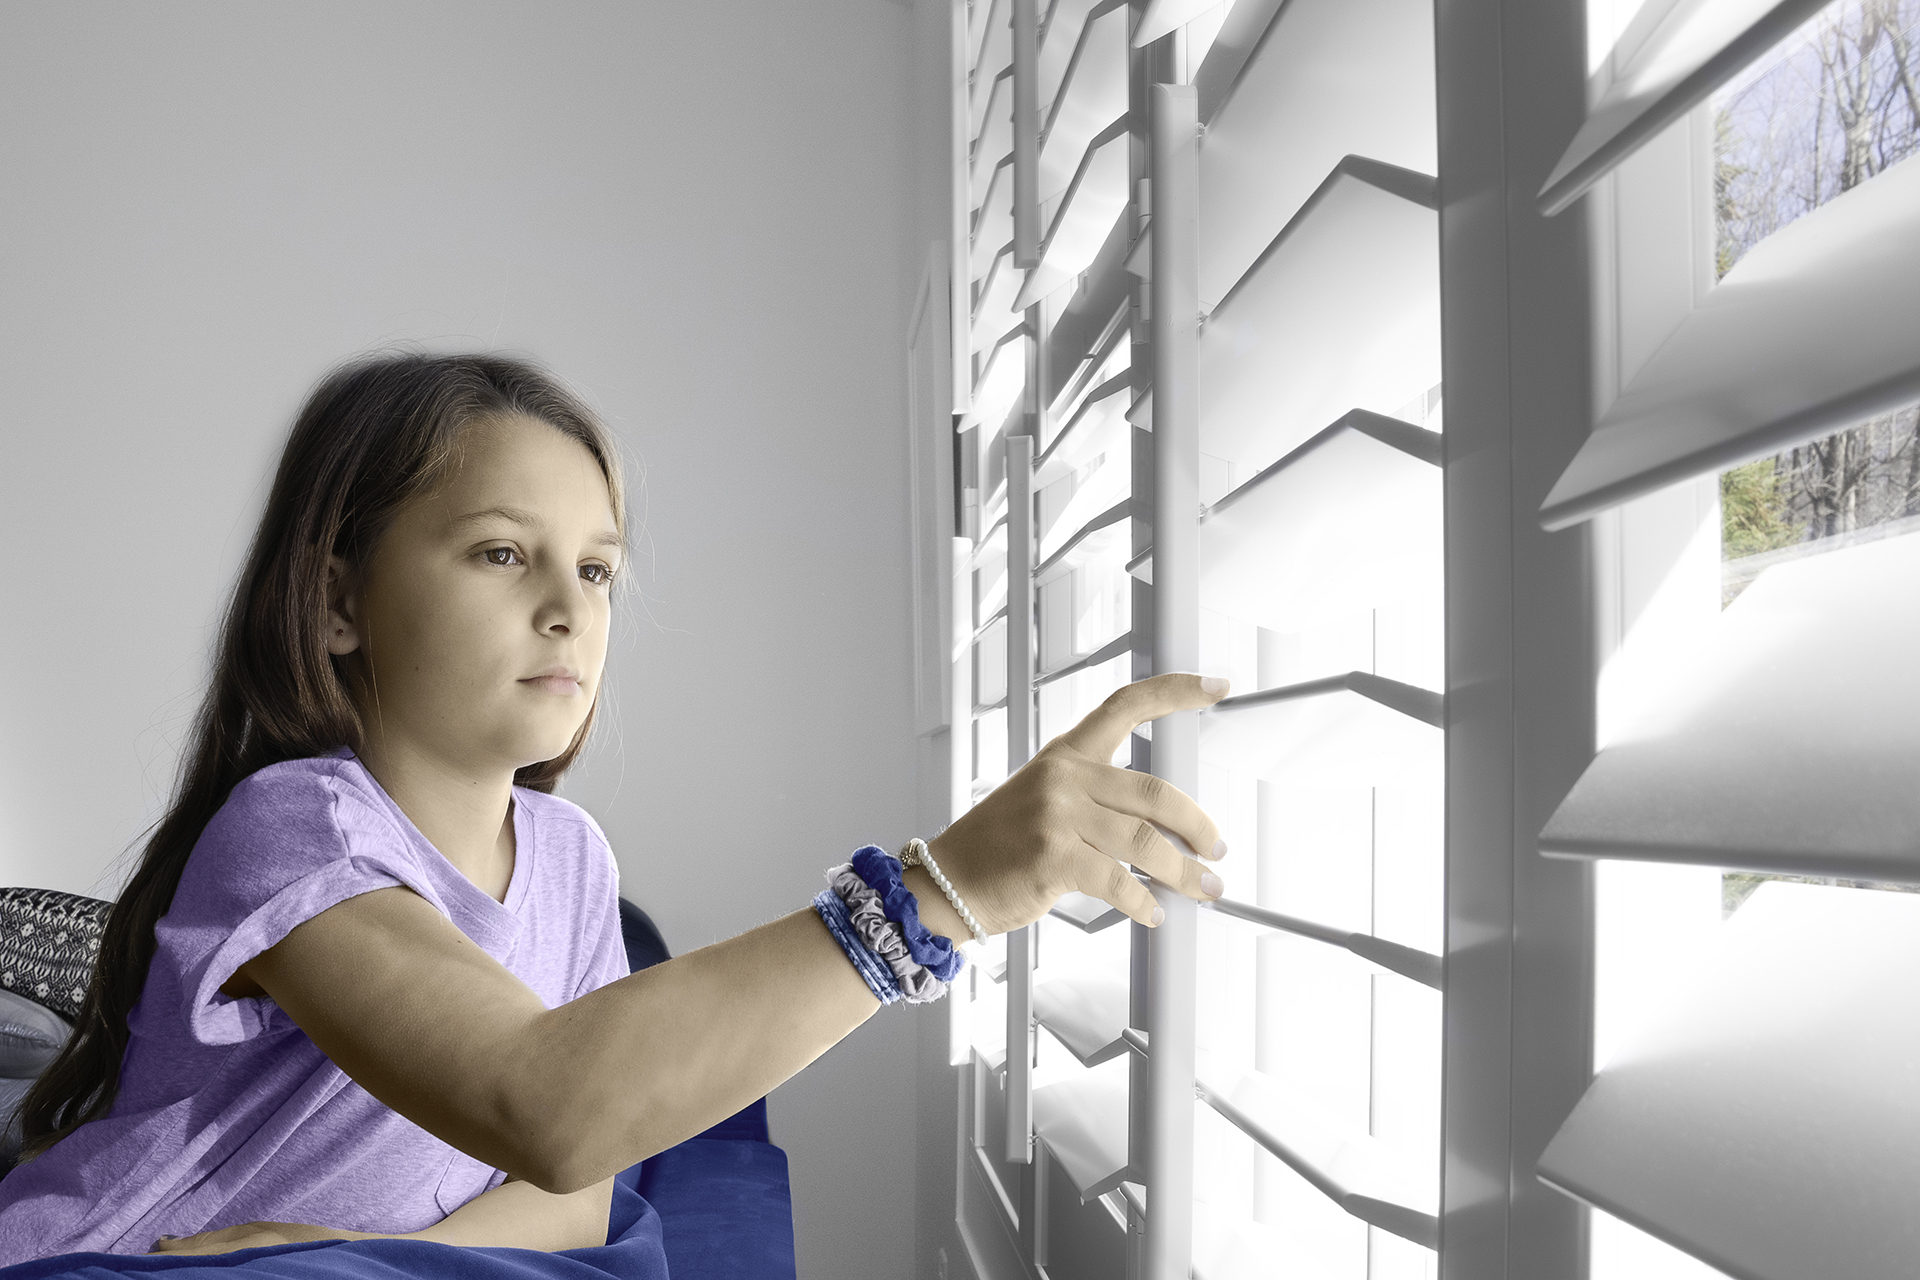 A young girl reaches out to touch the louvers on indoor shutters